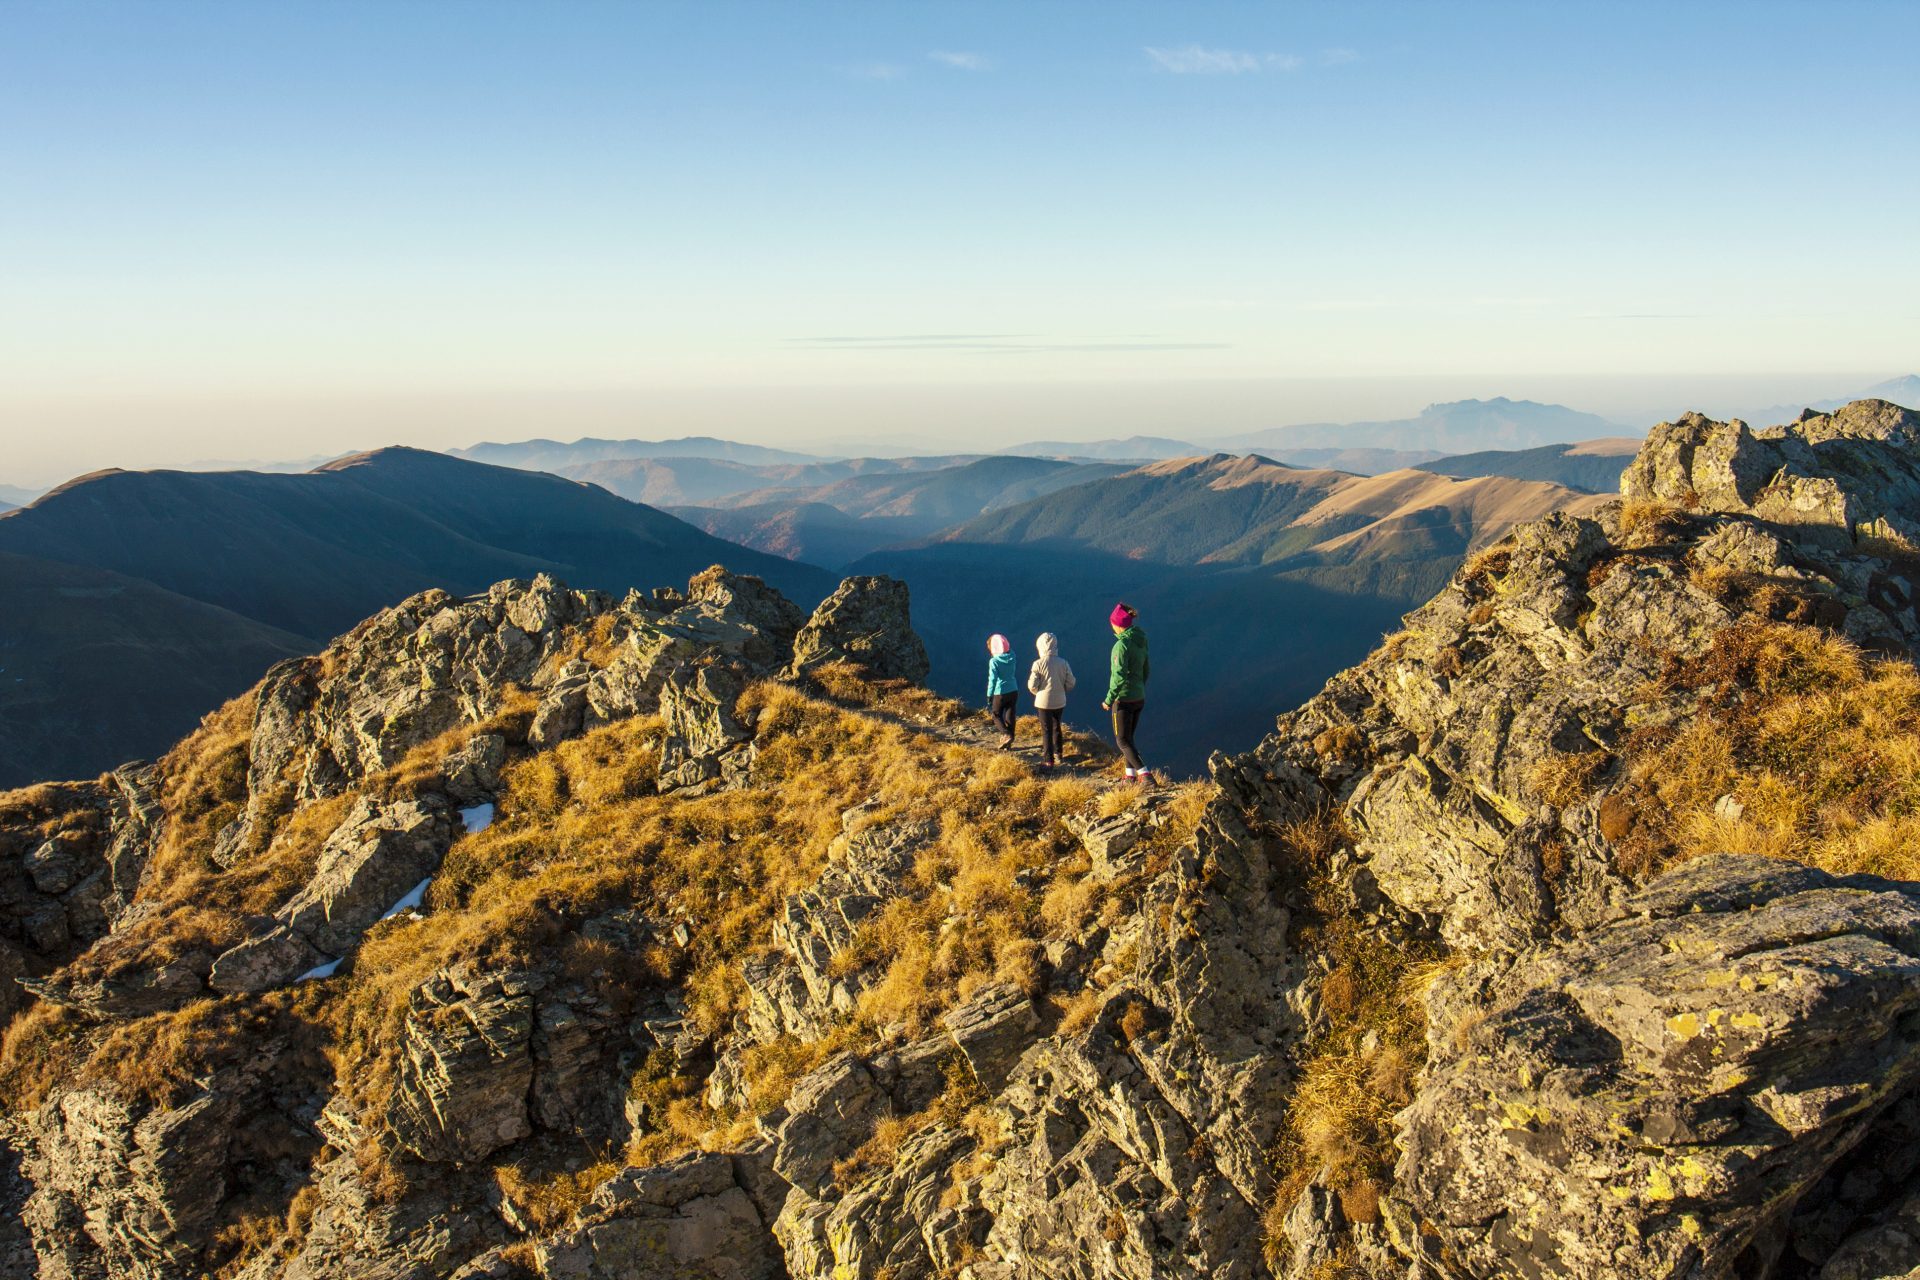 <p>There are sumptuous hiking trails in the Piatra Craiului massif and the Bucegi Mountains, in the heart of the Carpathians. By taking them, you will cross the most beautiful natural parks in Romania. Your trip can be completed in about 7 days.</p>